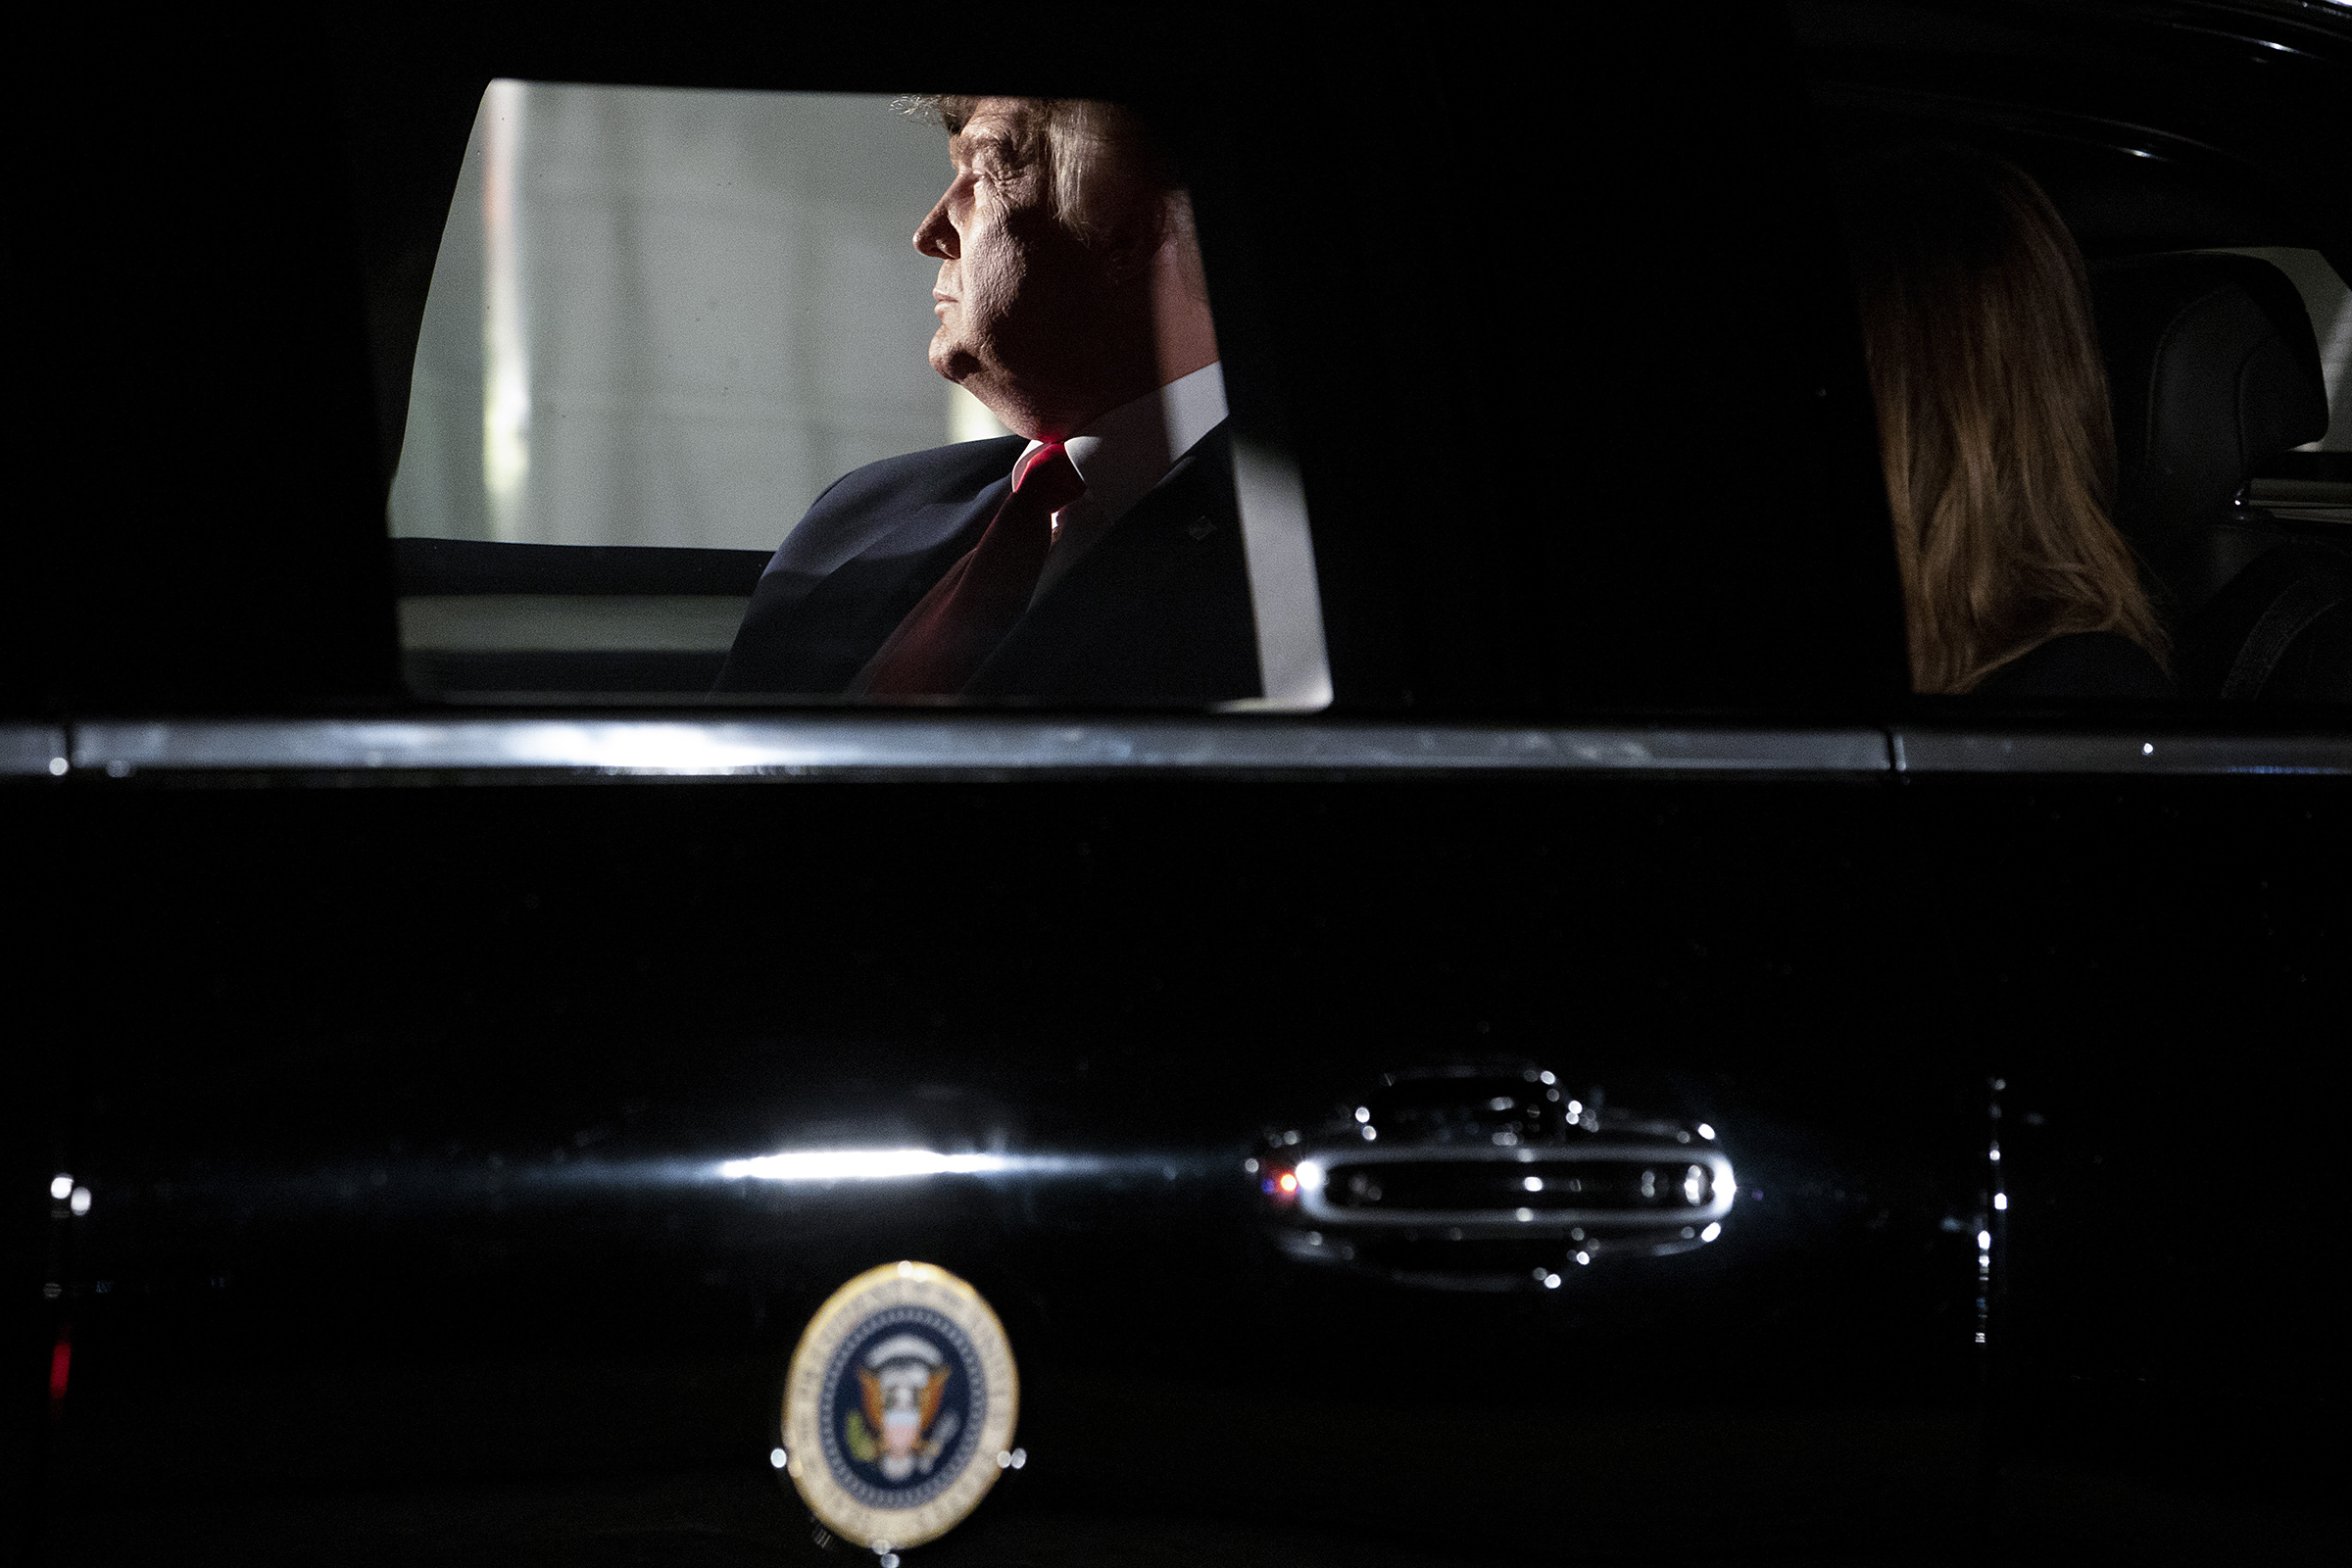 President Donald Trump sits in the presidential motorcade